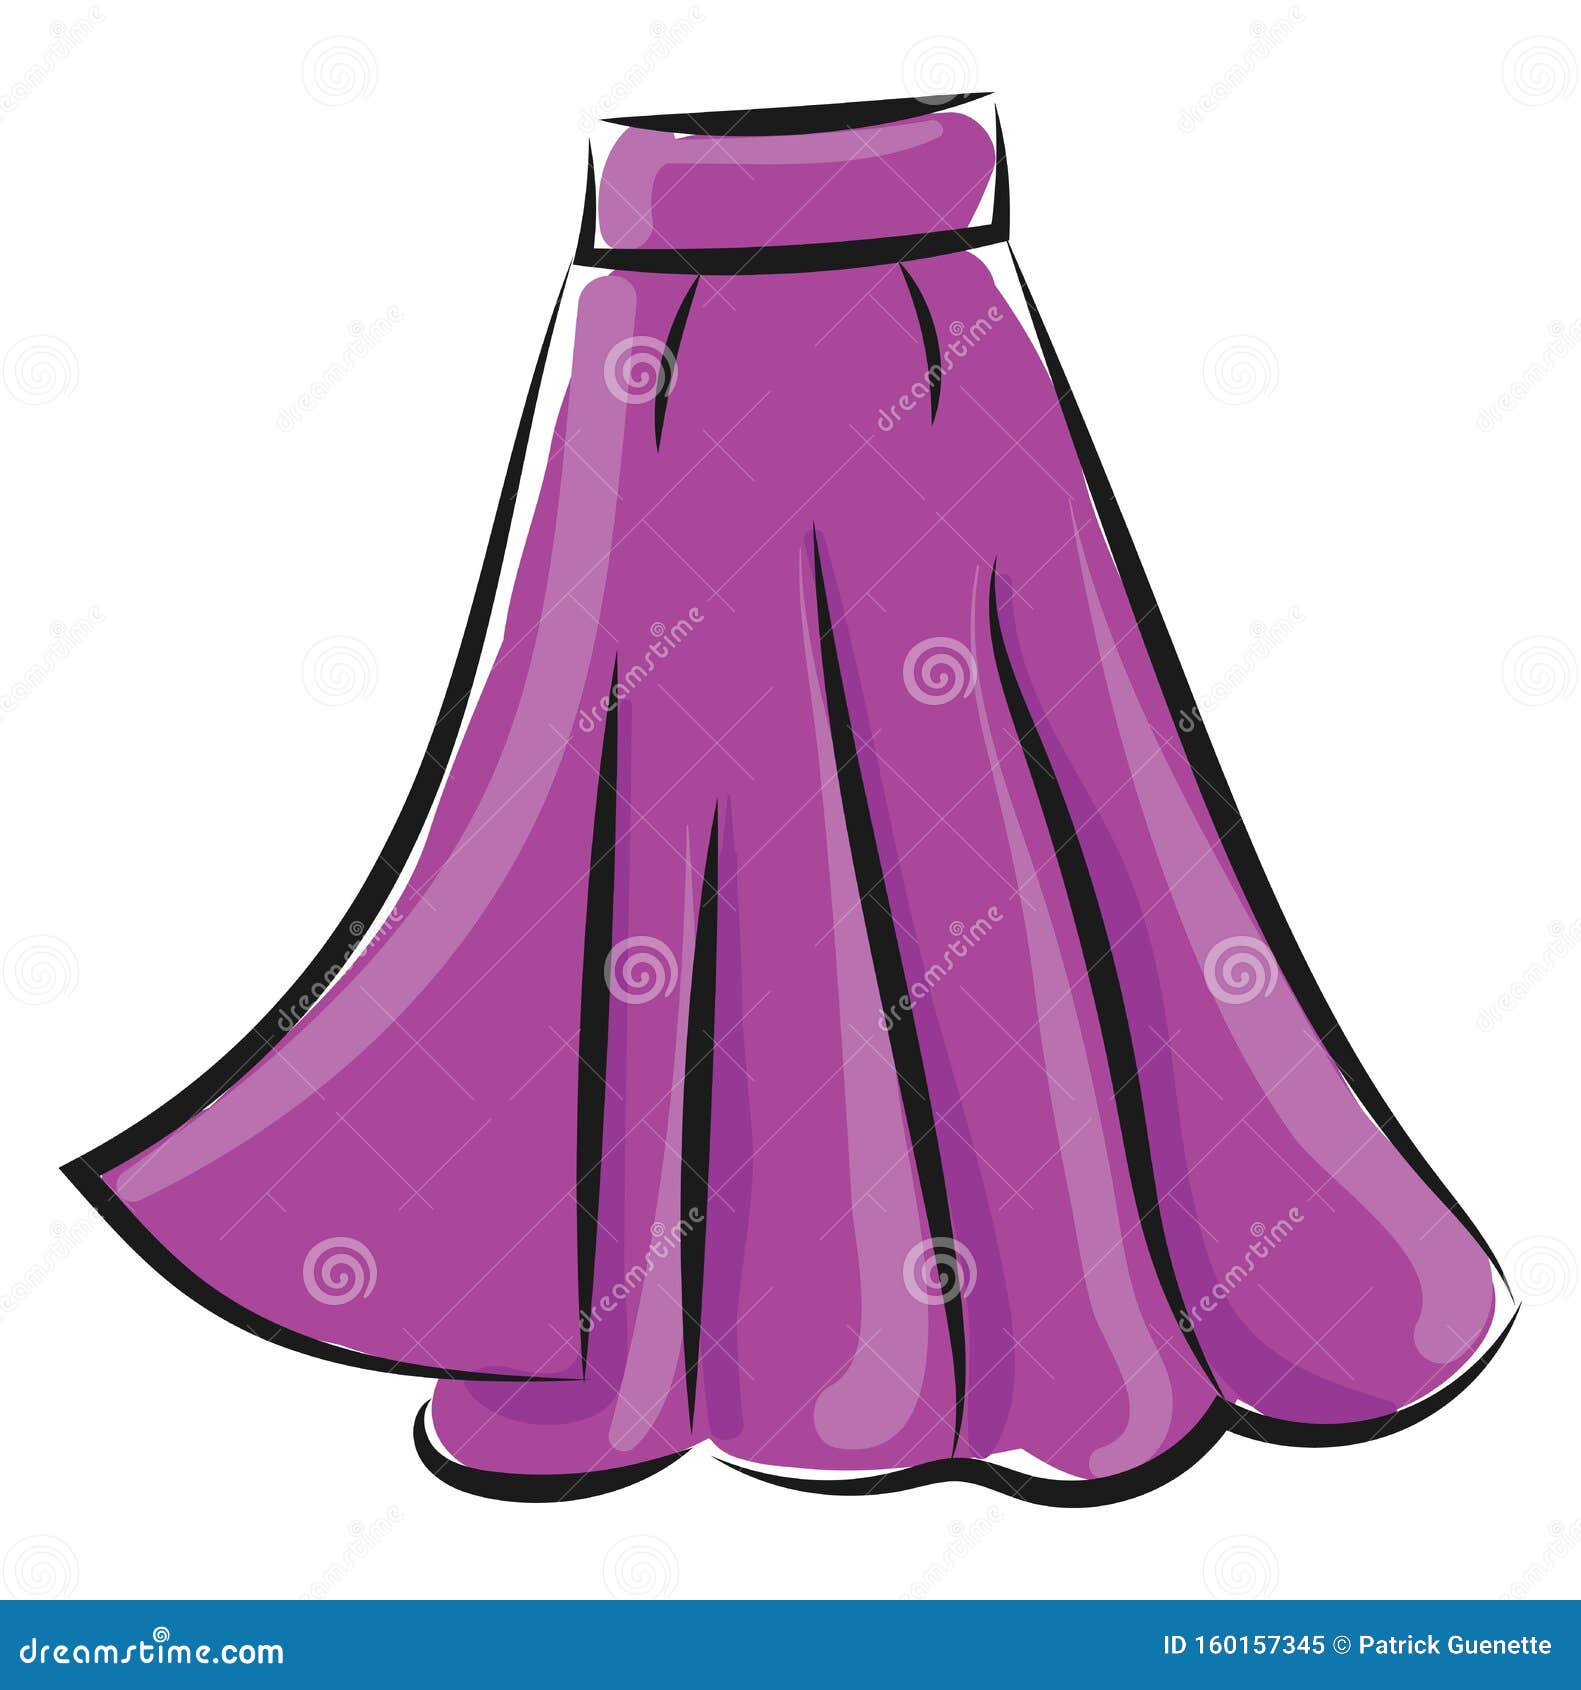 Clipart Of A Showcase Purple-colored Skirt Vector Or Color Illustration ...